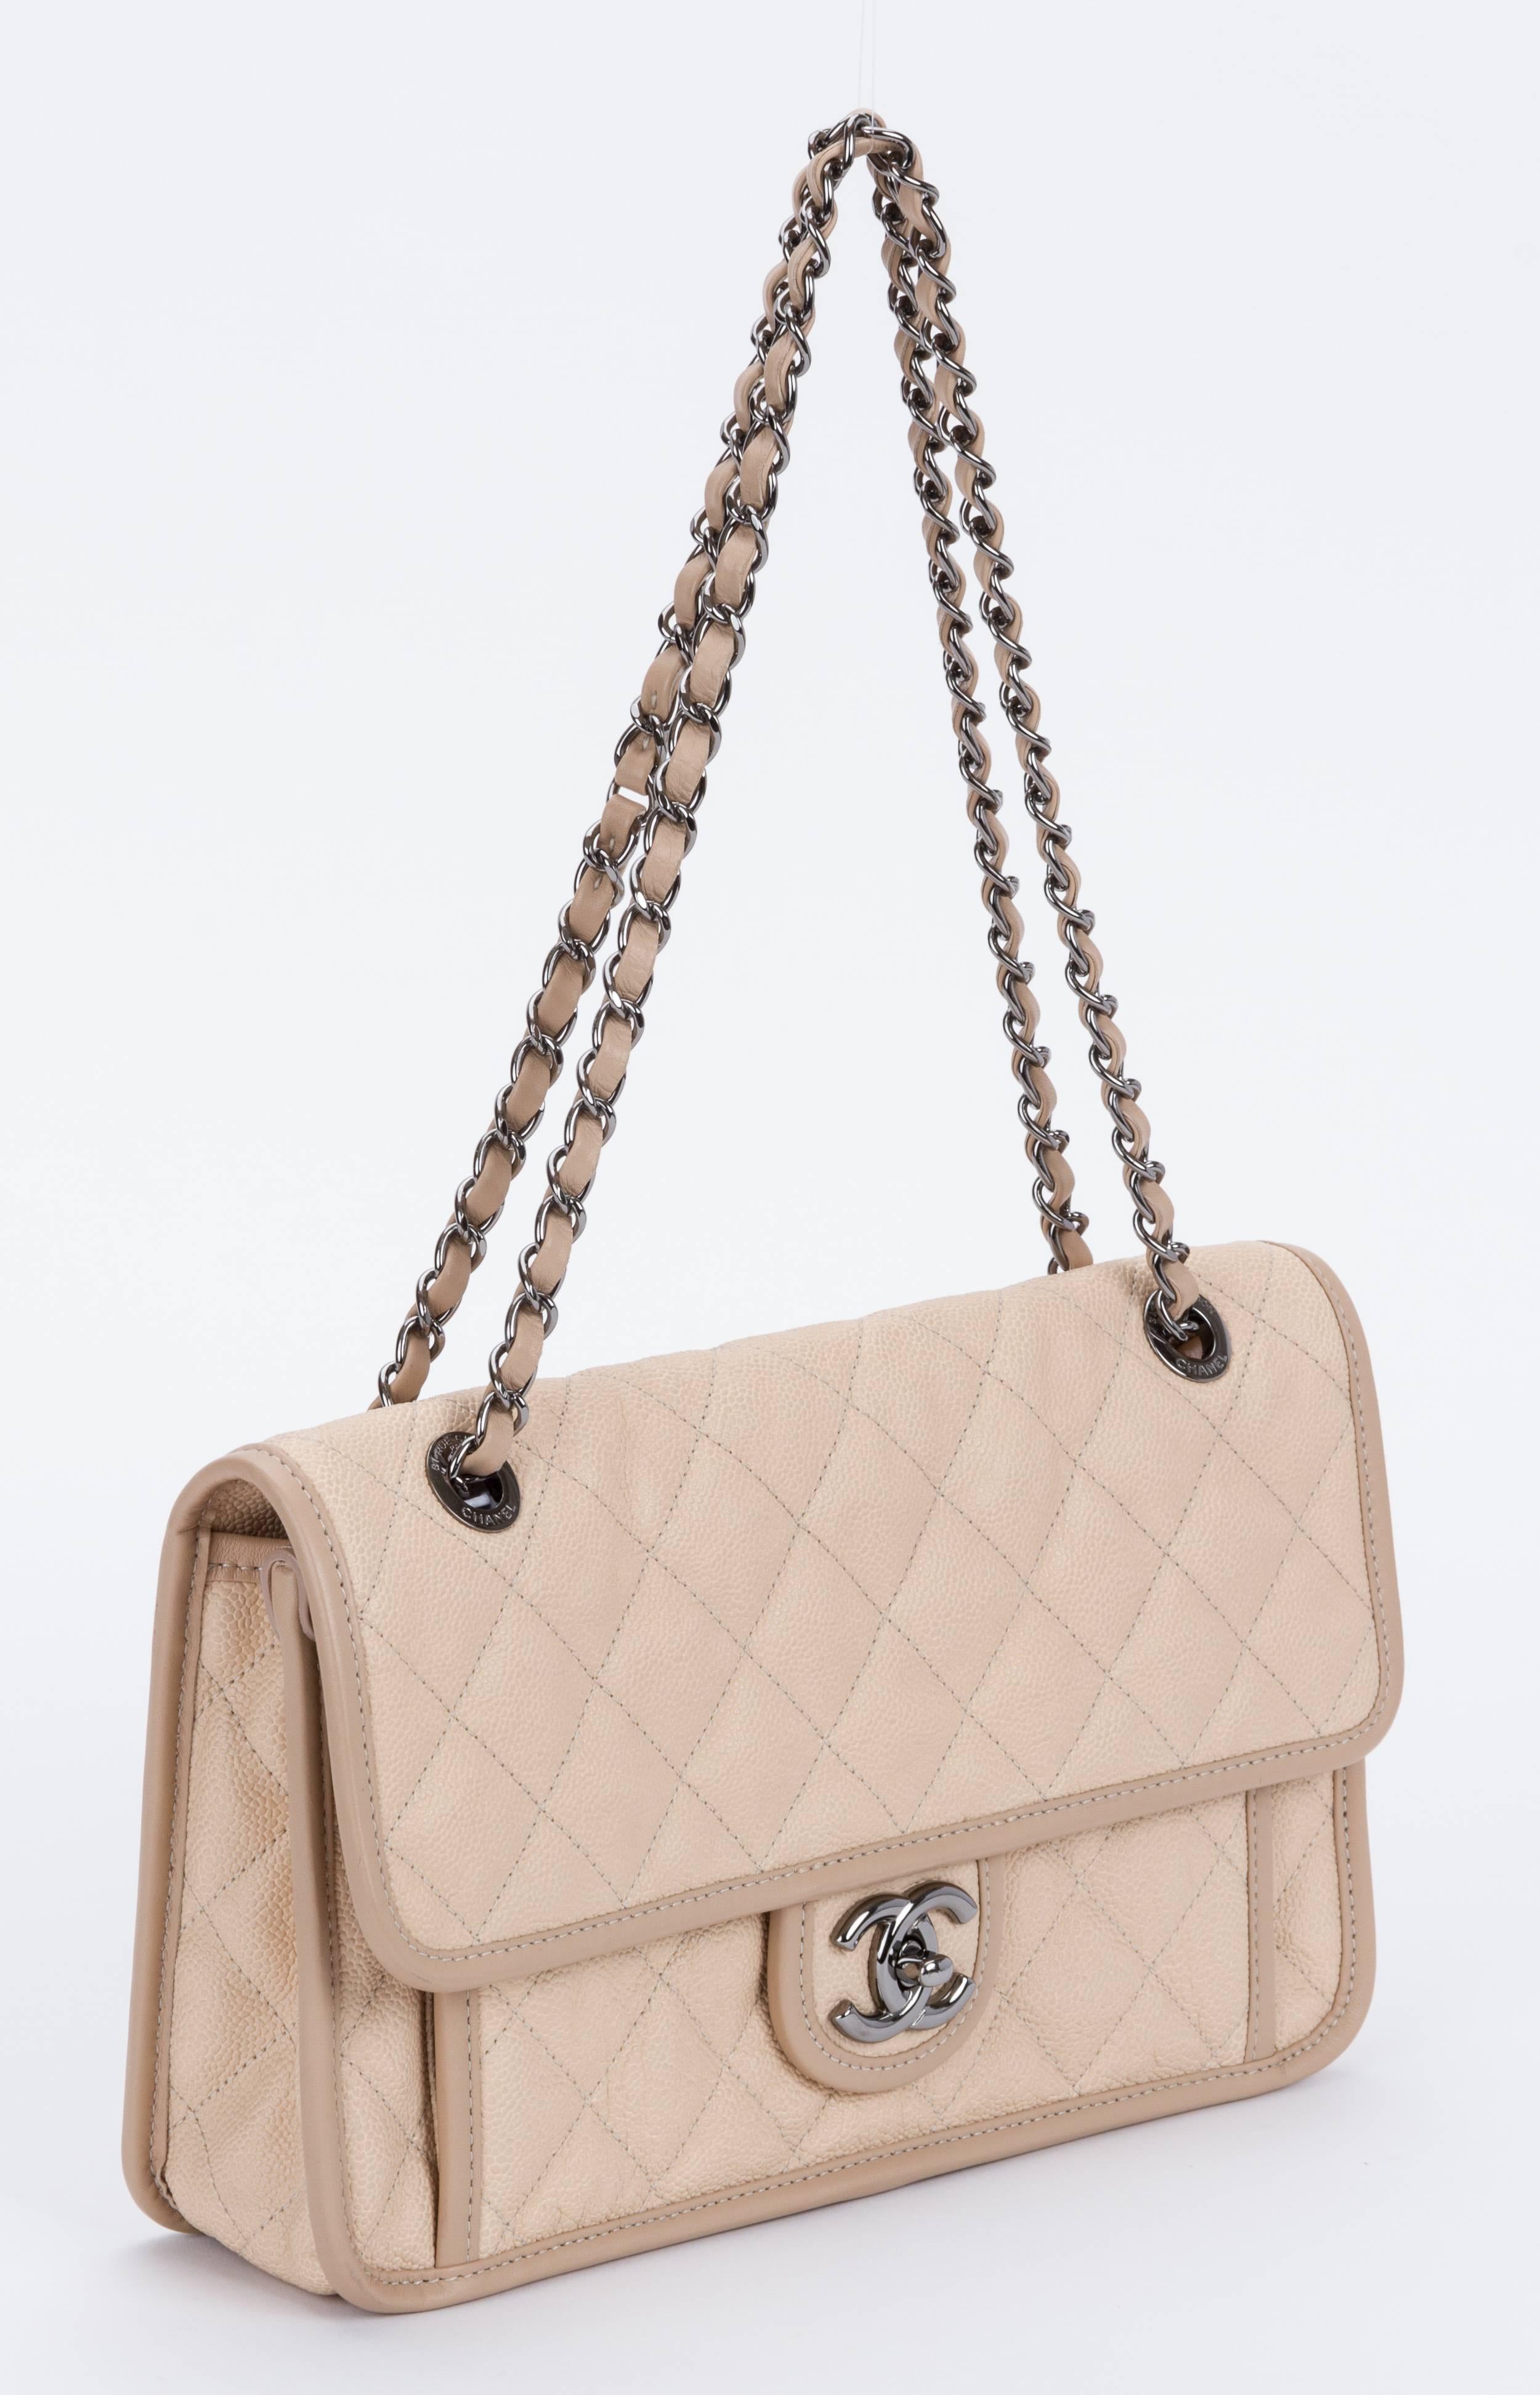 hanel beige cavair jumbo novelty flap with darker trim. Comes with hologram, id card, partial plastic on internal hardware and original box. Strap drop 9